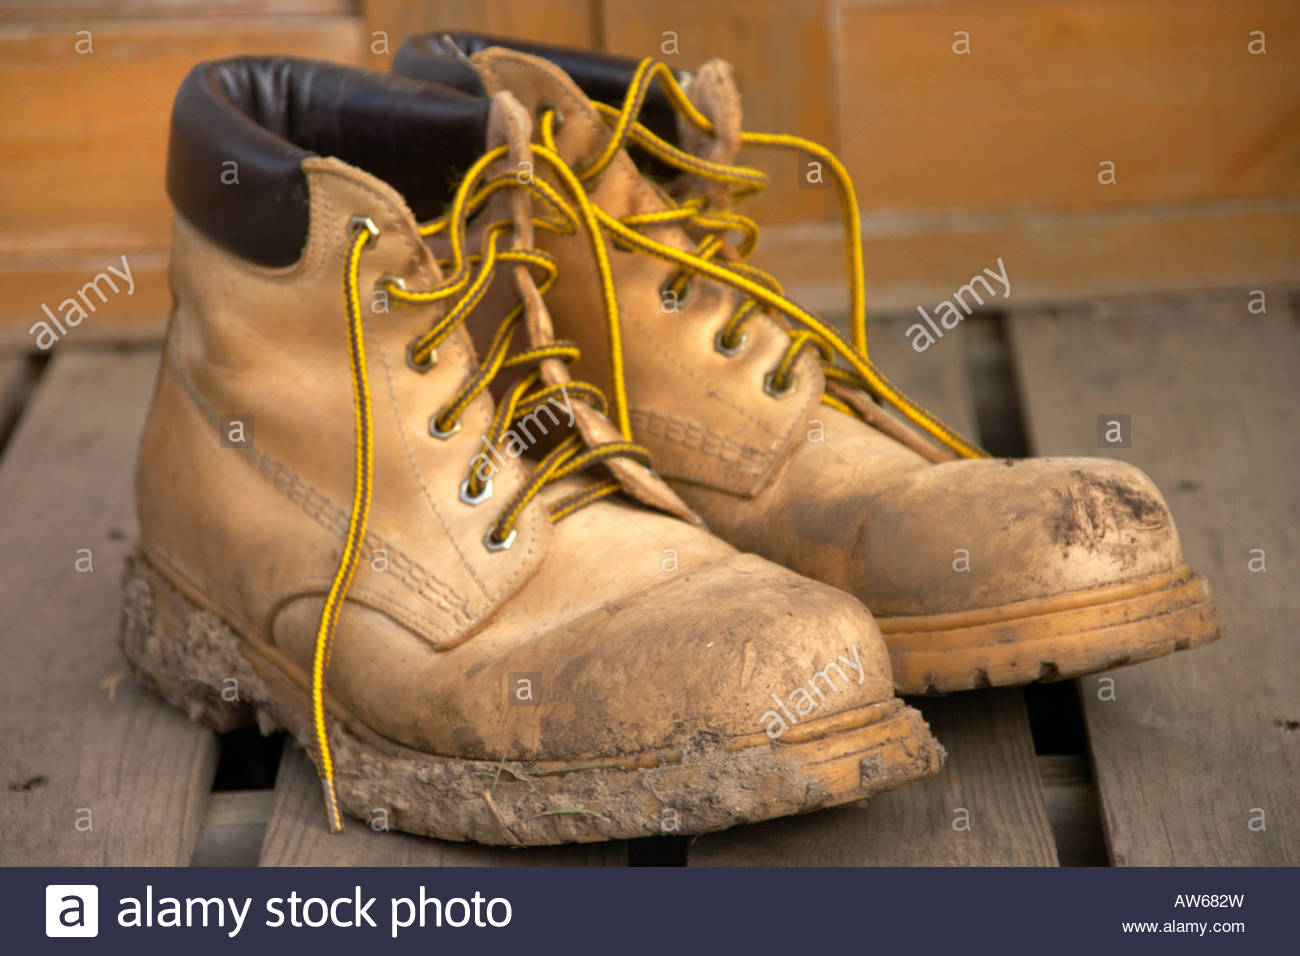 work construction boots